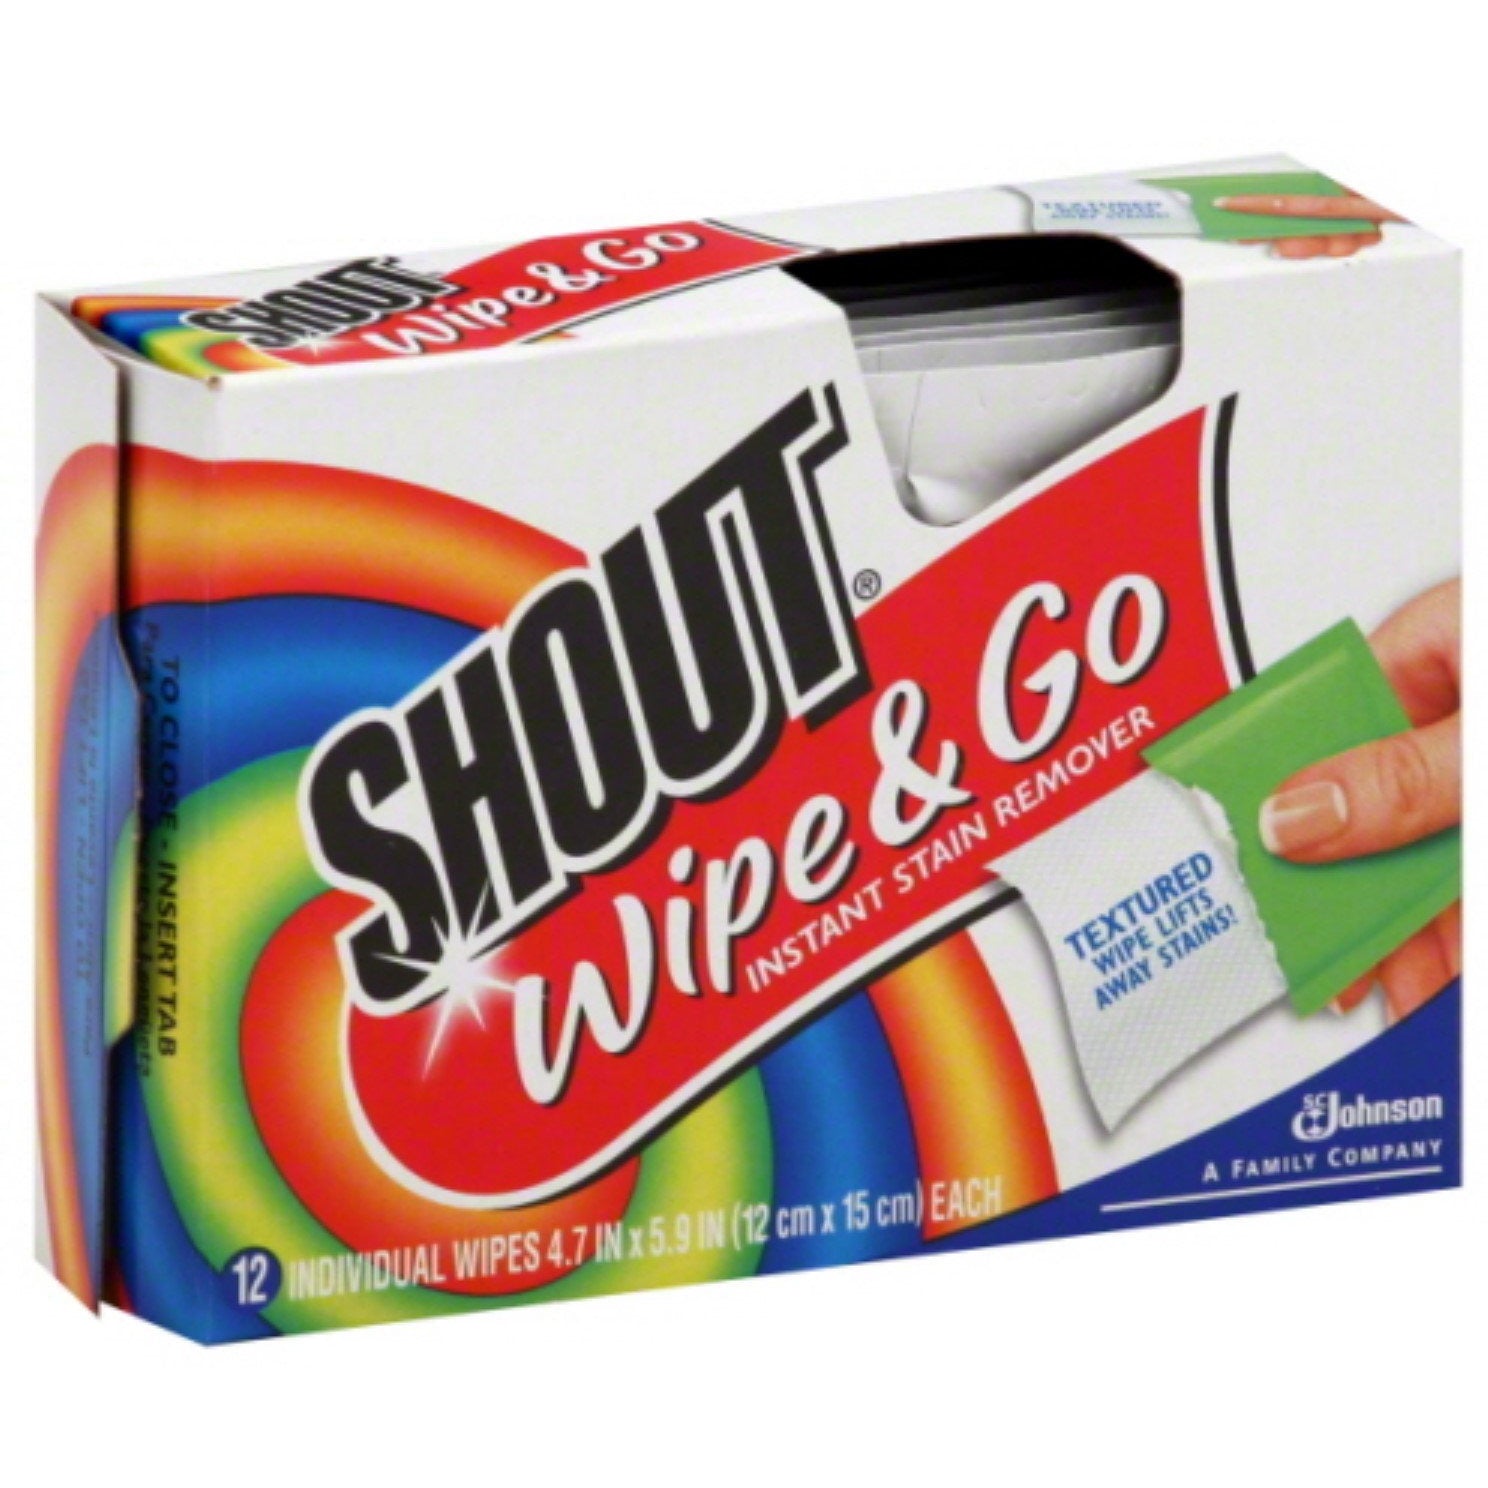 Shout Wipe & Go Stain Remover Wipes, 12 Ct